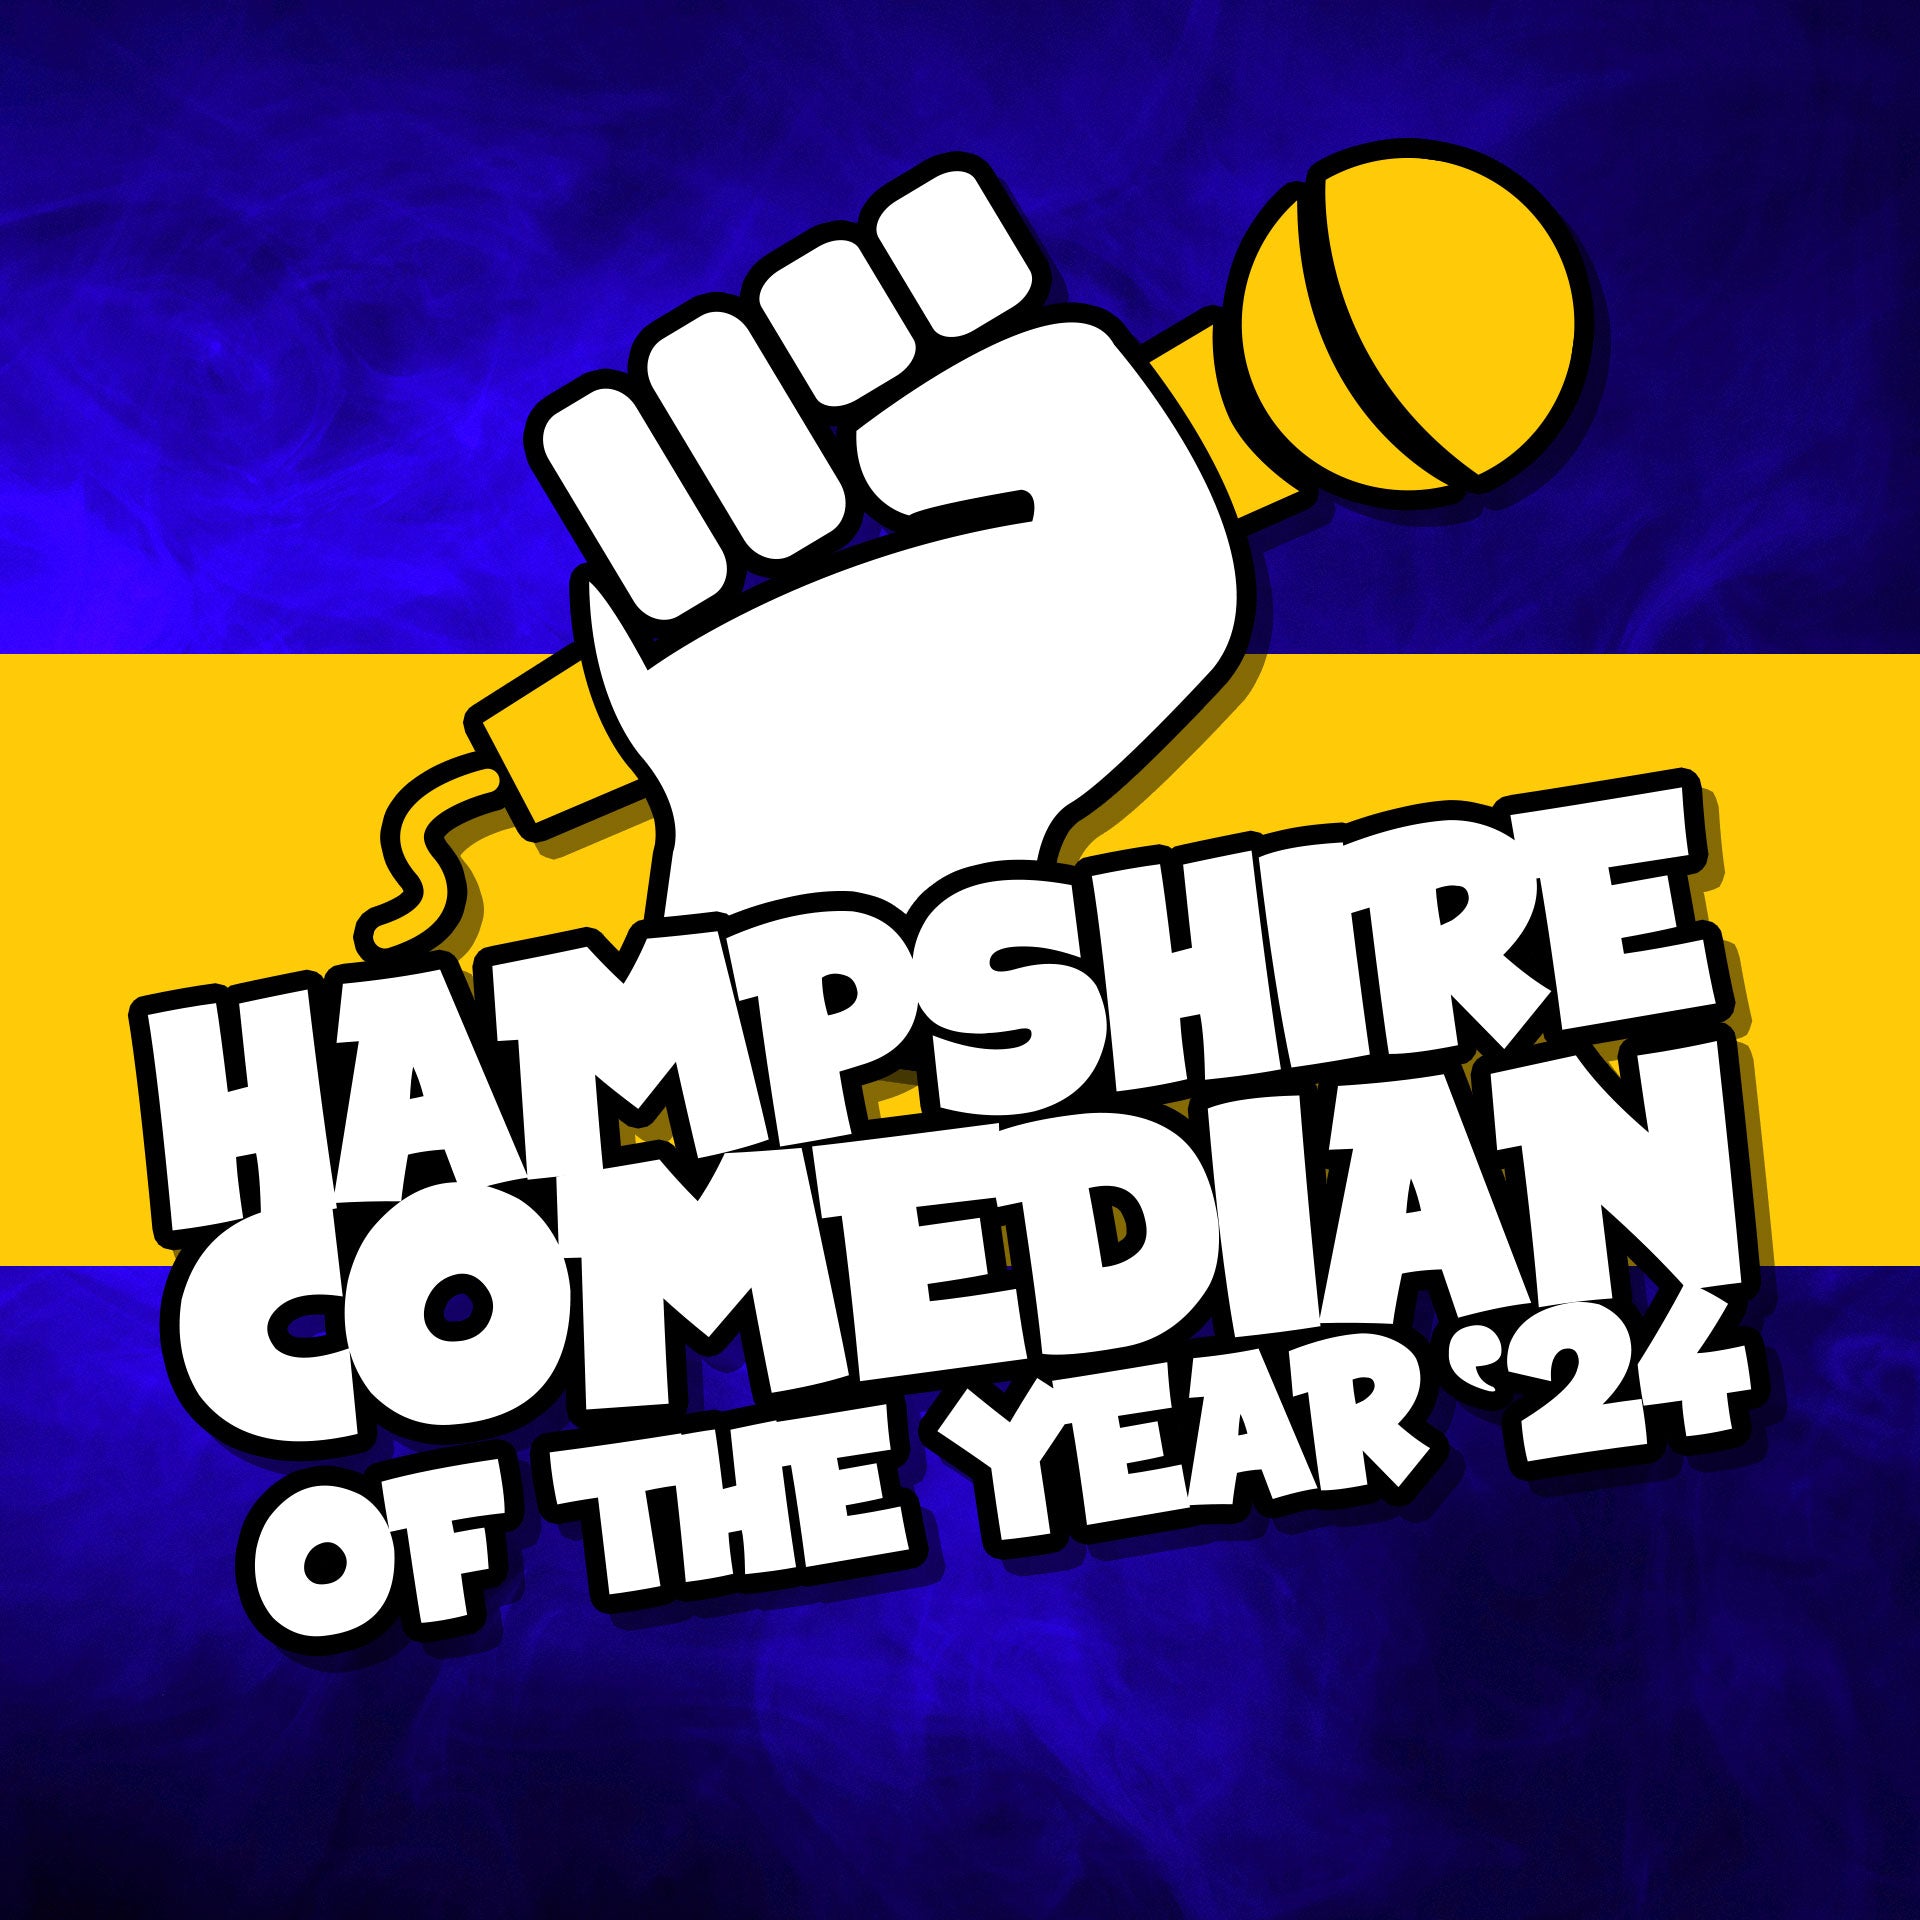 Heat 1, Hampshire Comedian of the Year 2024